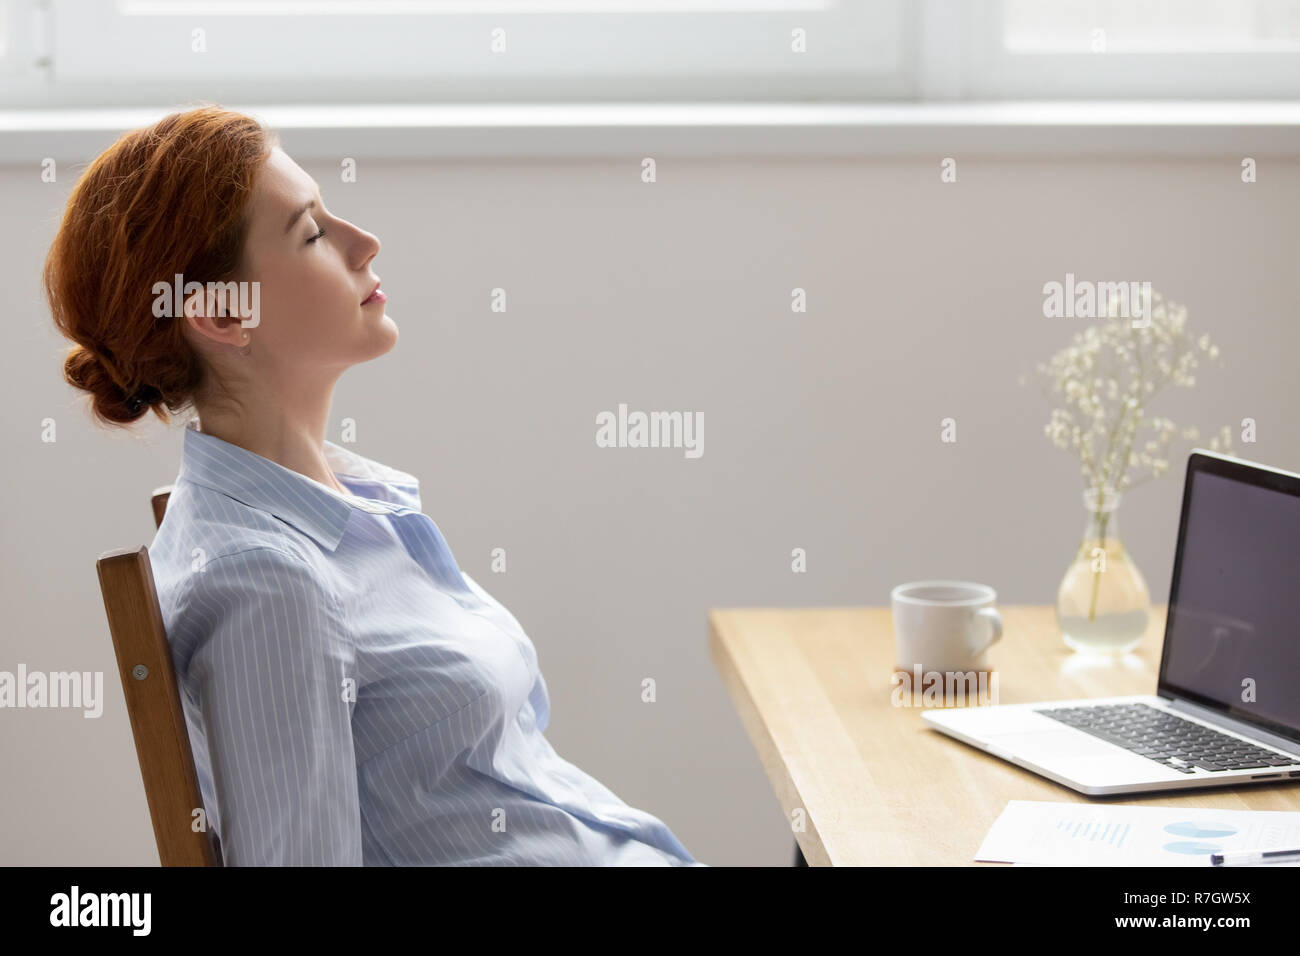 Side View Female Resting With Closed Eyes At Work Stock Photo